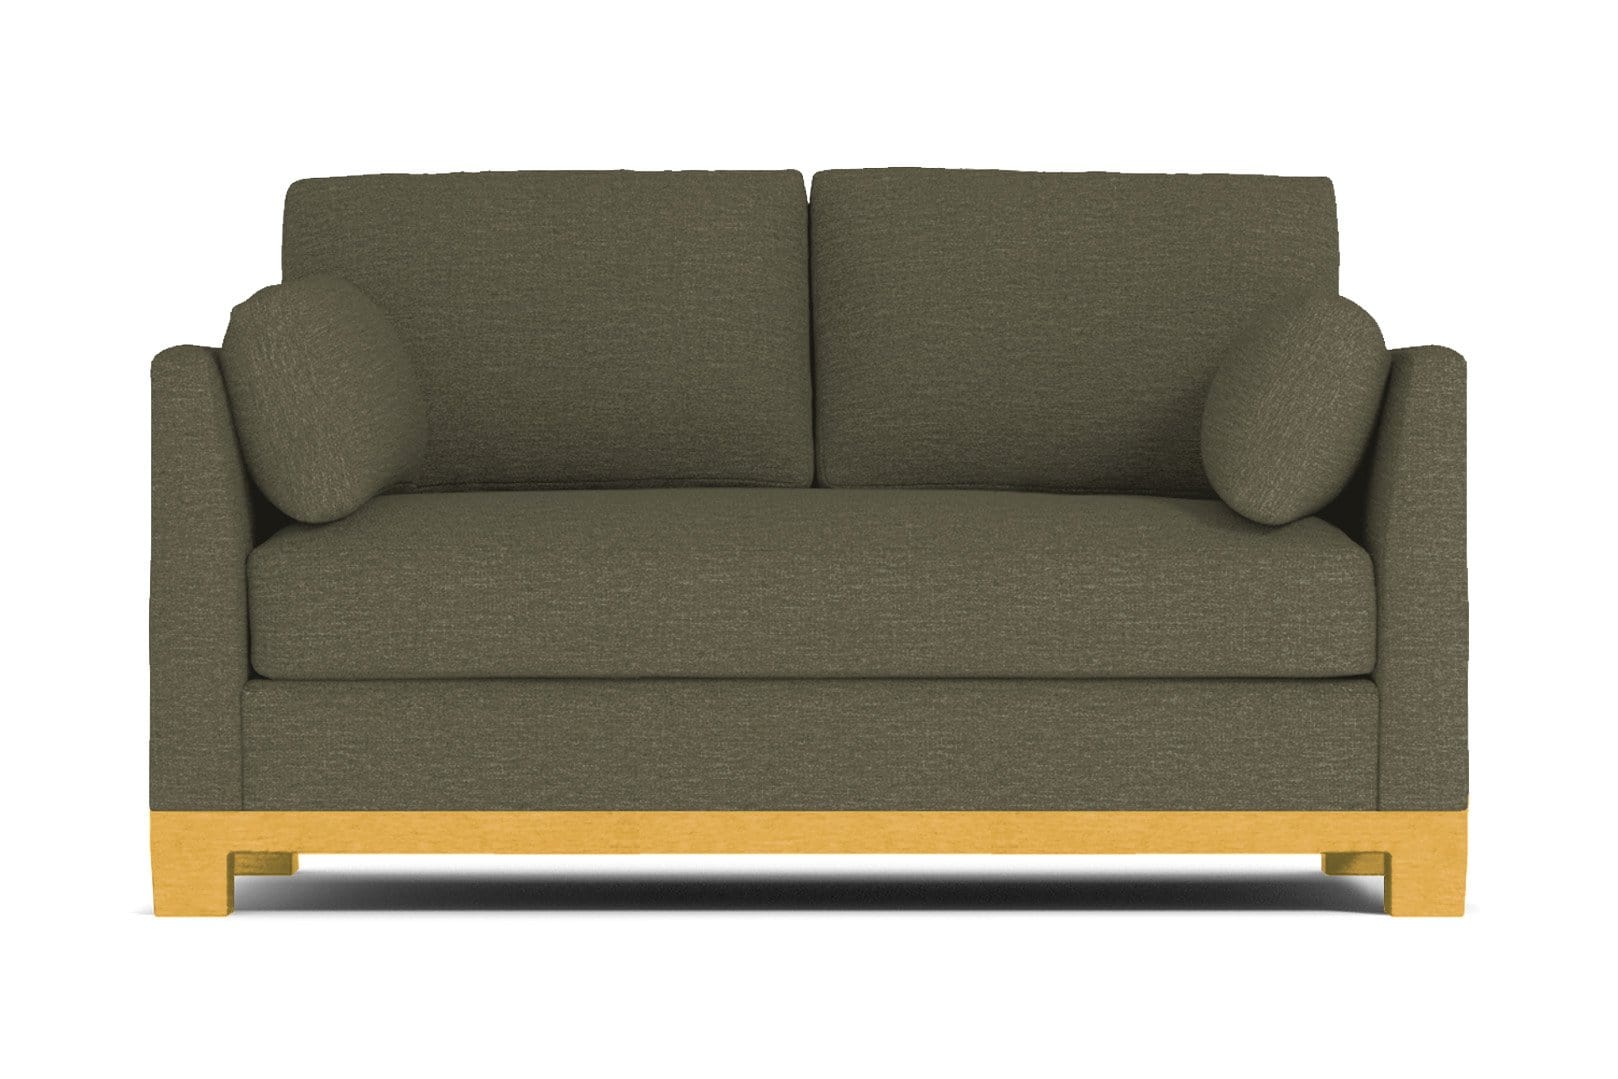 Avalon Apartment Size Sofa - Green -  Small Space Modern Couch Made in the USA - Sold by Apt2B